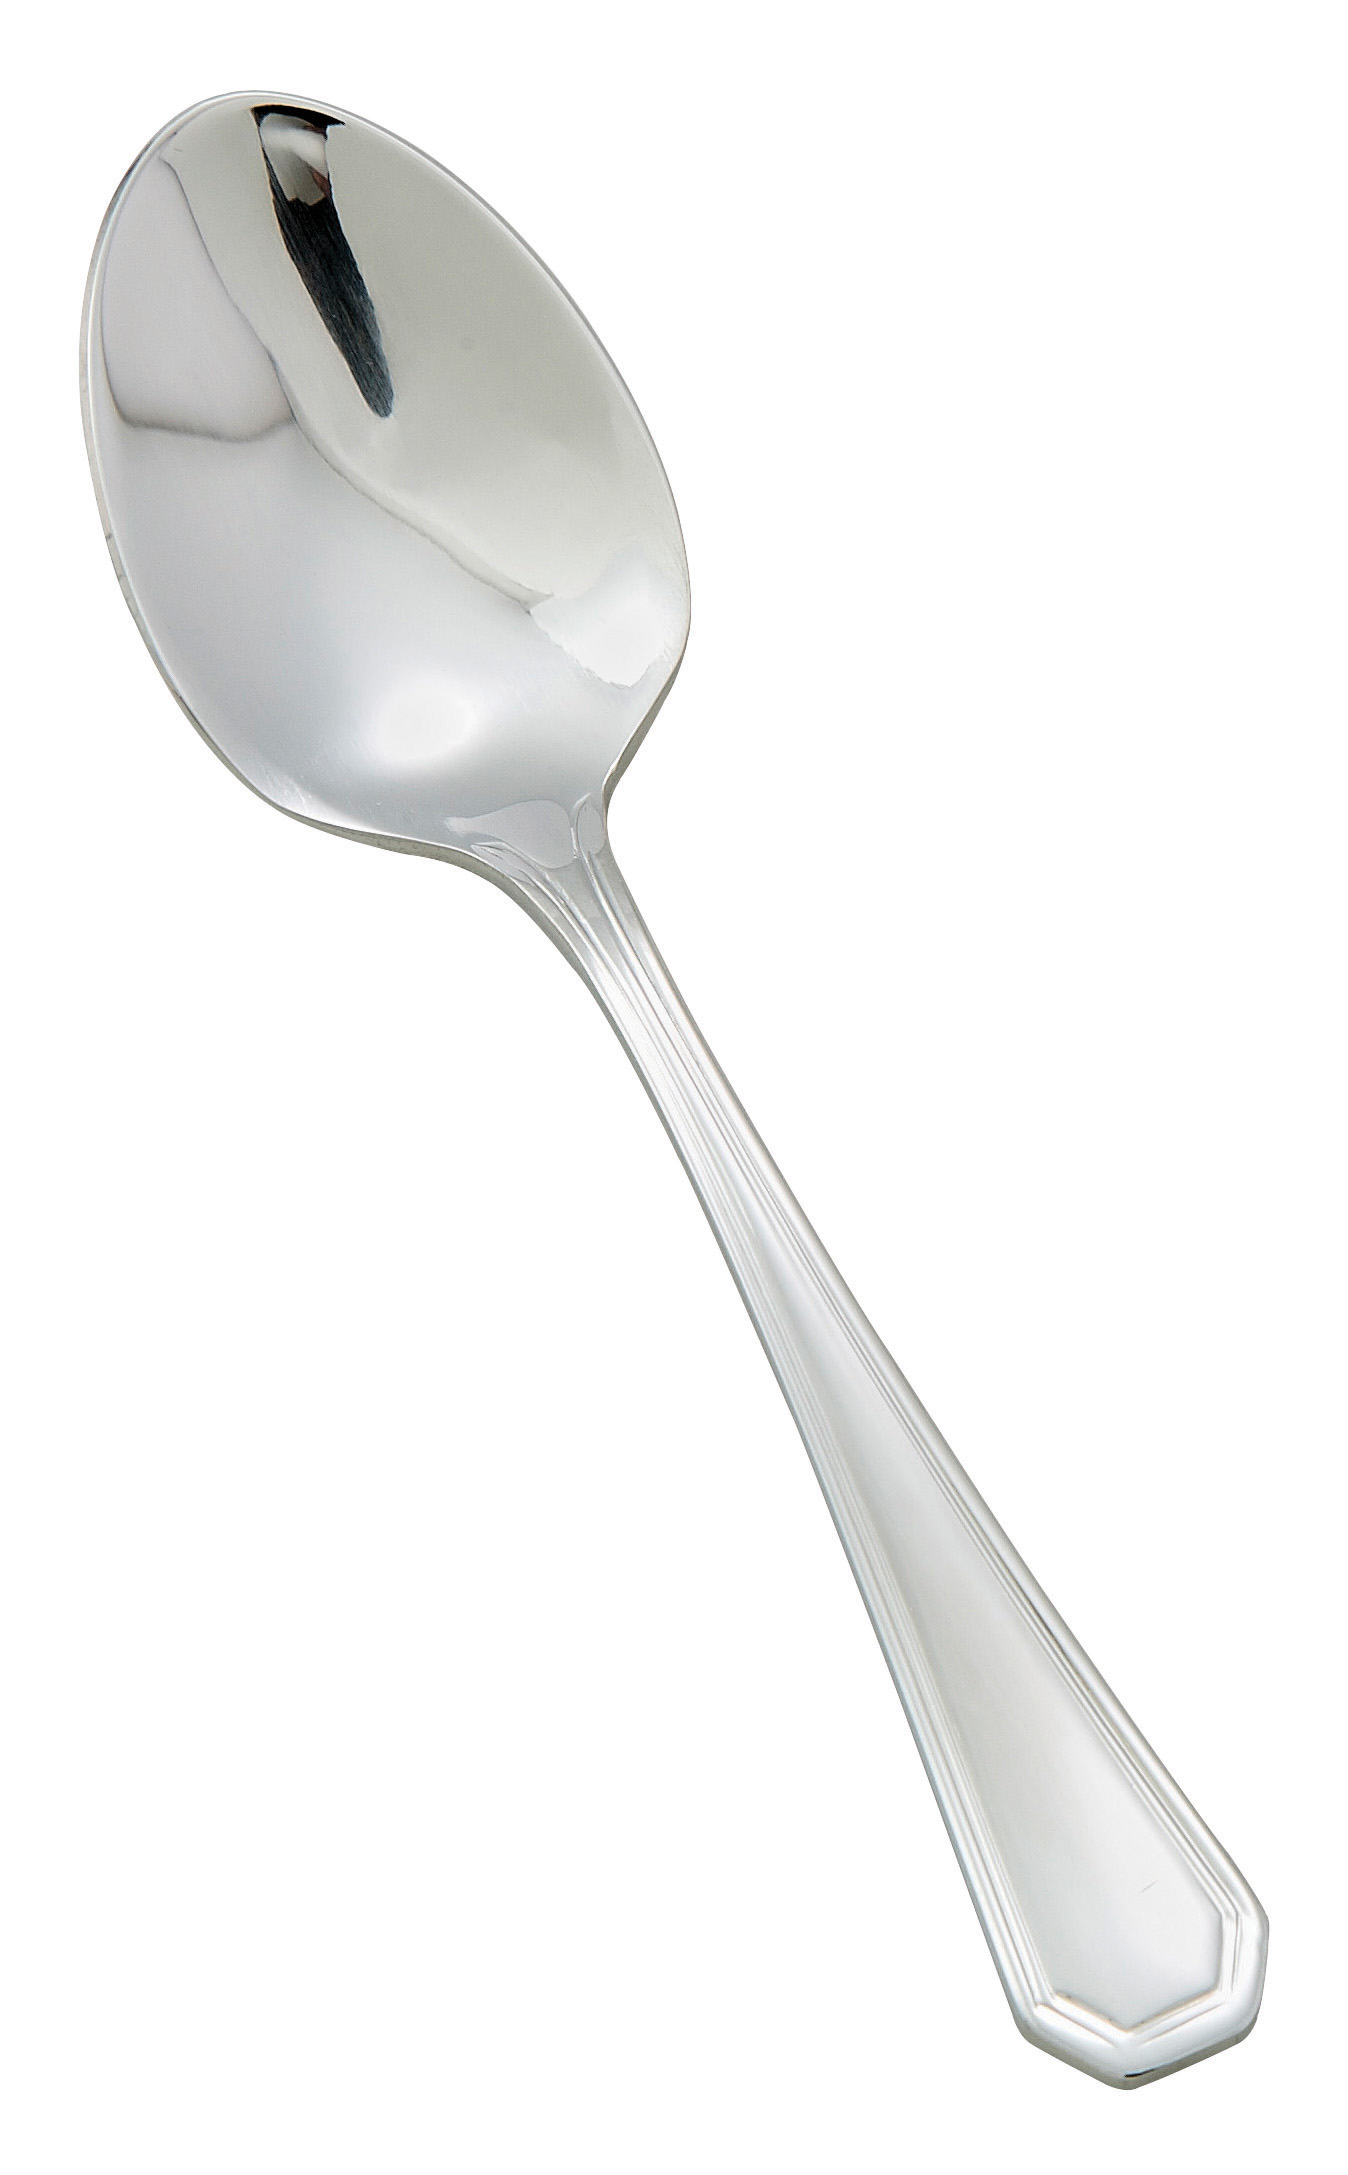 Demitasse Spoon, 4-3/8&quot;, 18/8
stainless steel, extra heavy
weight, mirror finish,
Victoria, President
Collection, 1/doz